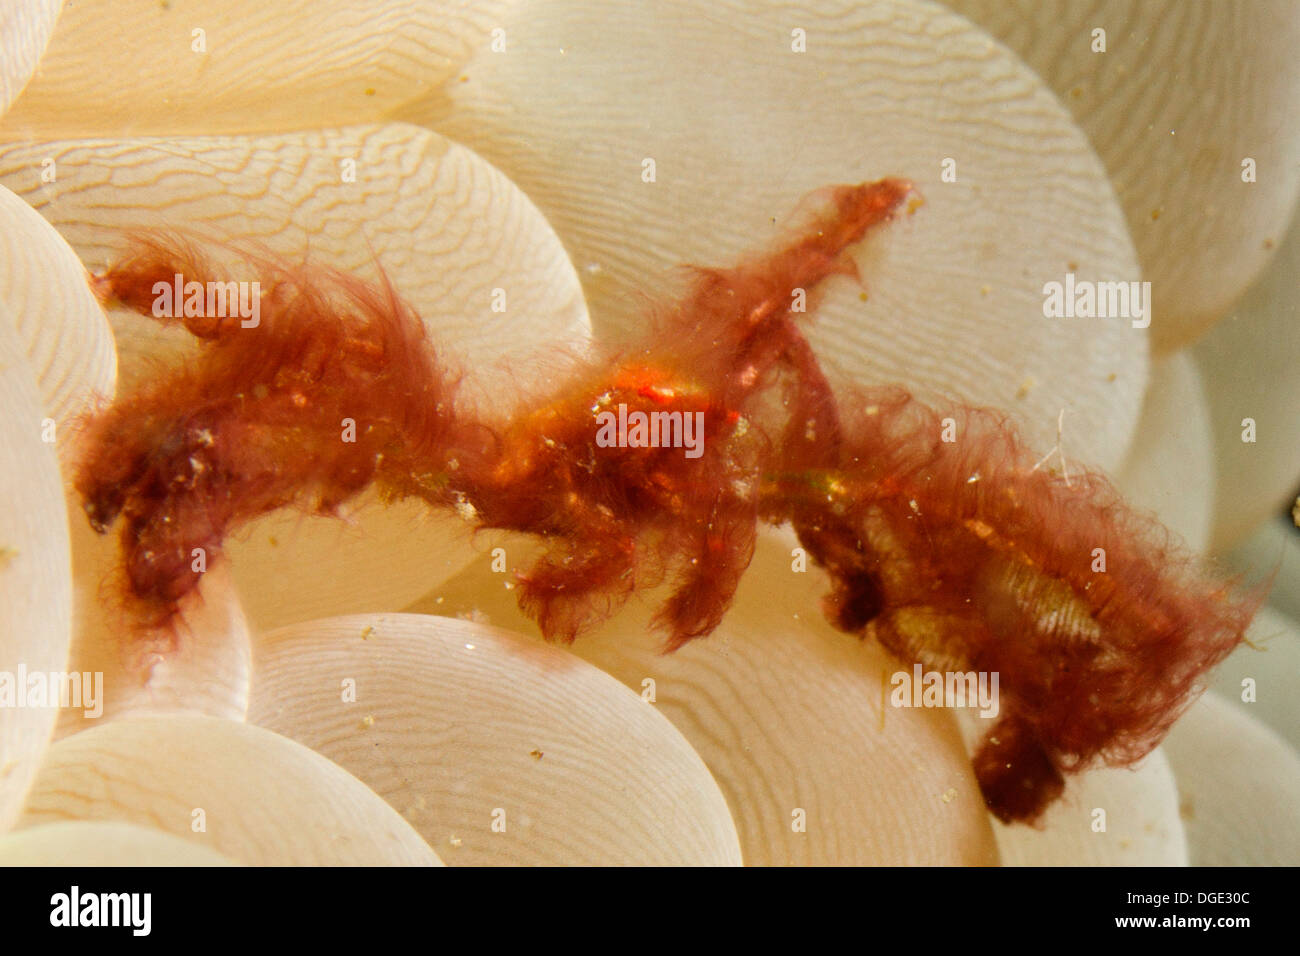 Orangutan Crab covered with fine hairs and debris lives in Bubble Coral.(Oncinopus sp.).Lembeh Straits,Indonesia Stock Photo